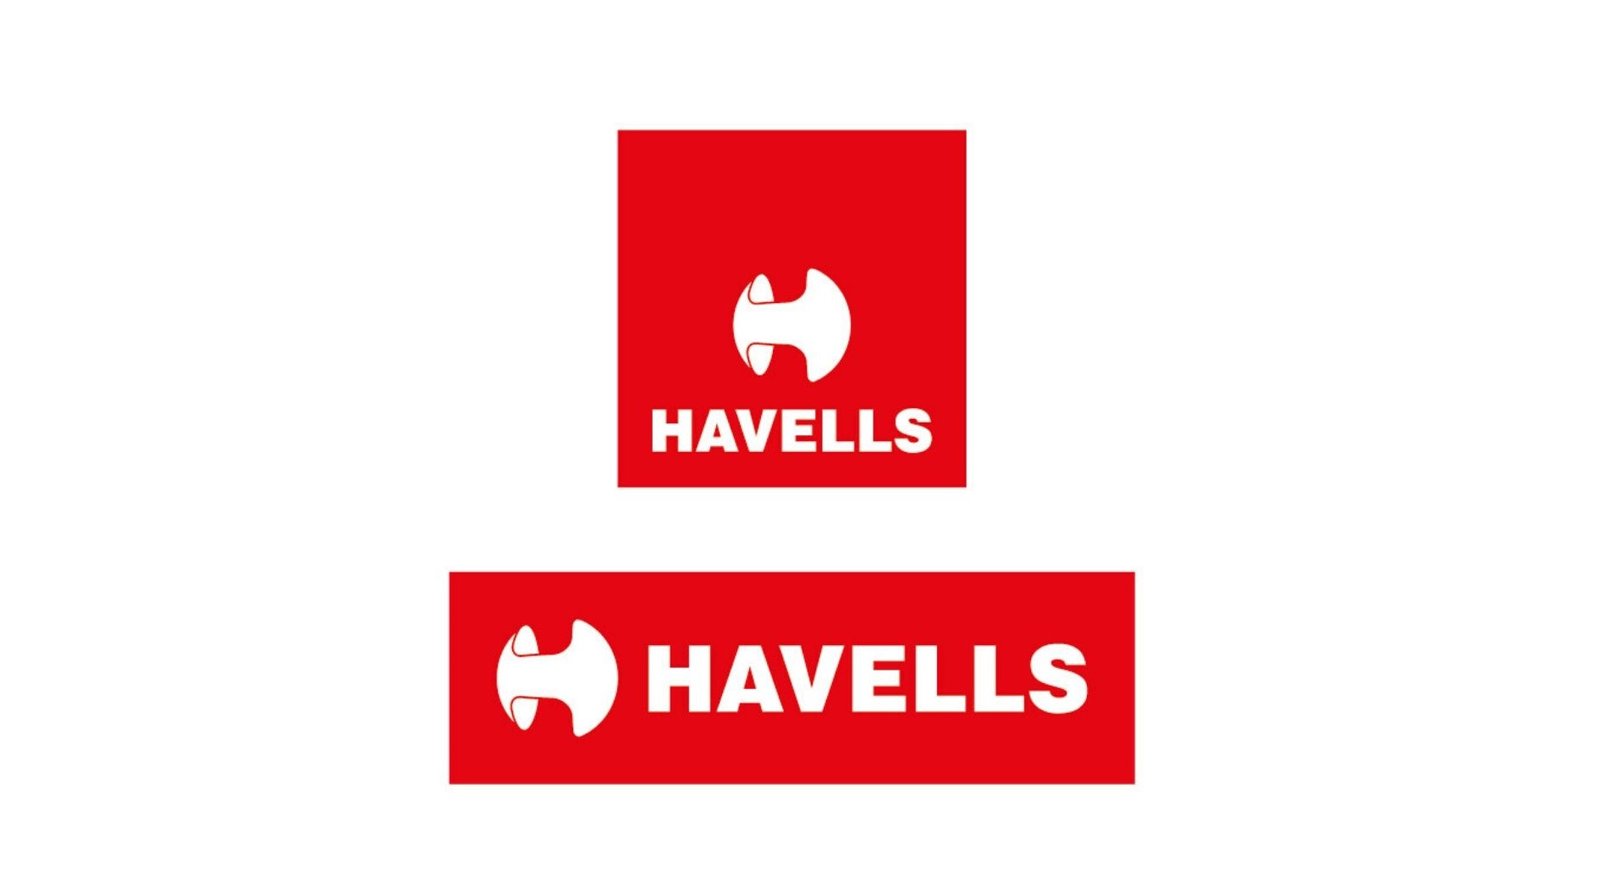 Marketing Strategy of Havells